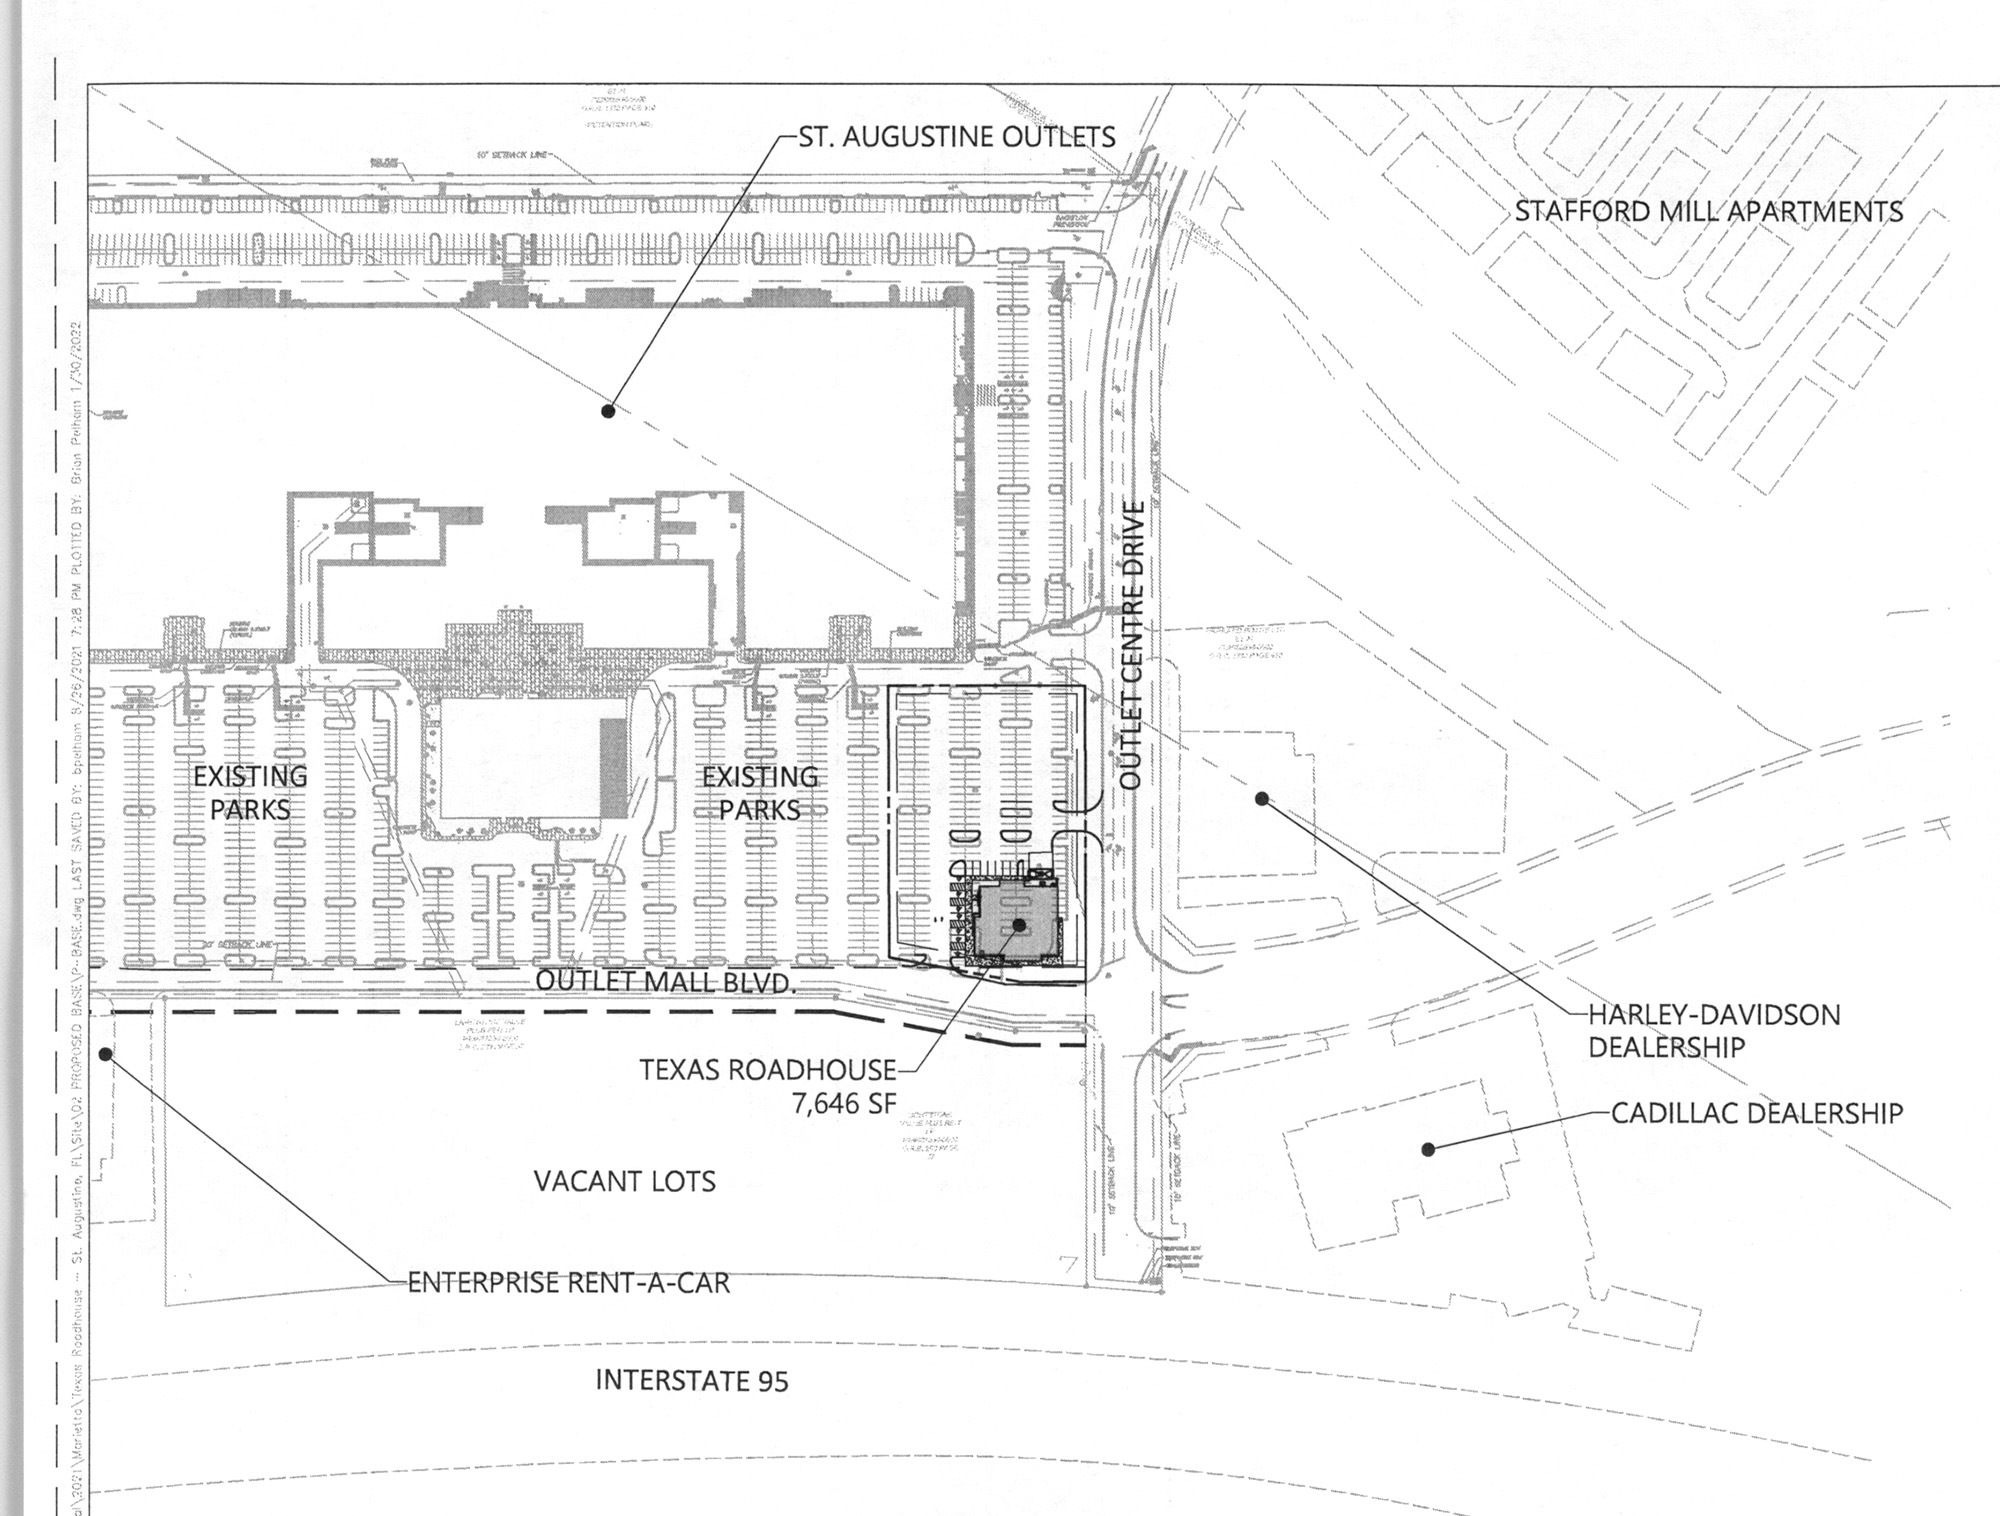 Texas Roadhouse is planned near the Cadillac and Harley-Davidson dealerships in front of the outlet mall.